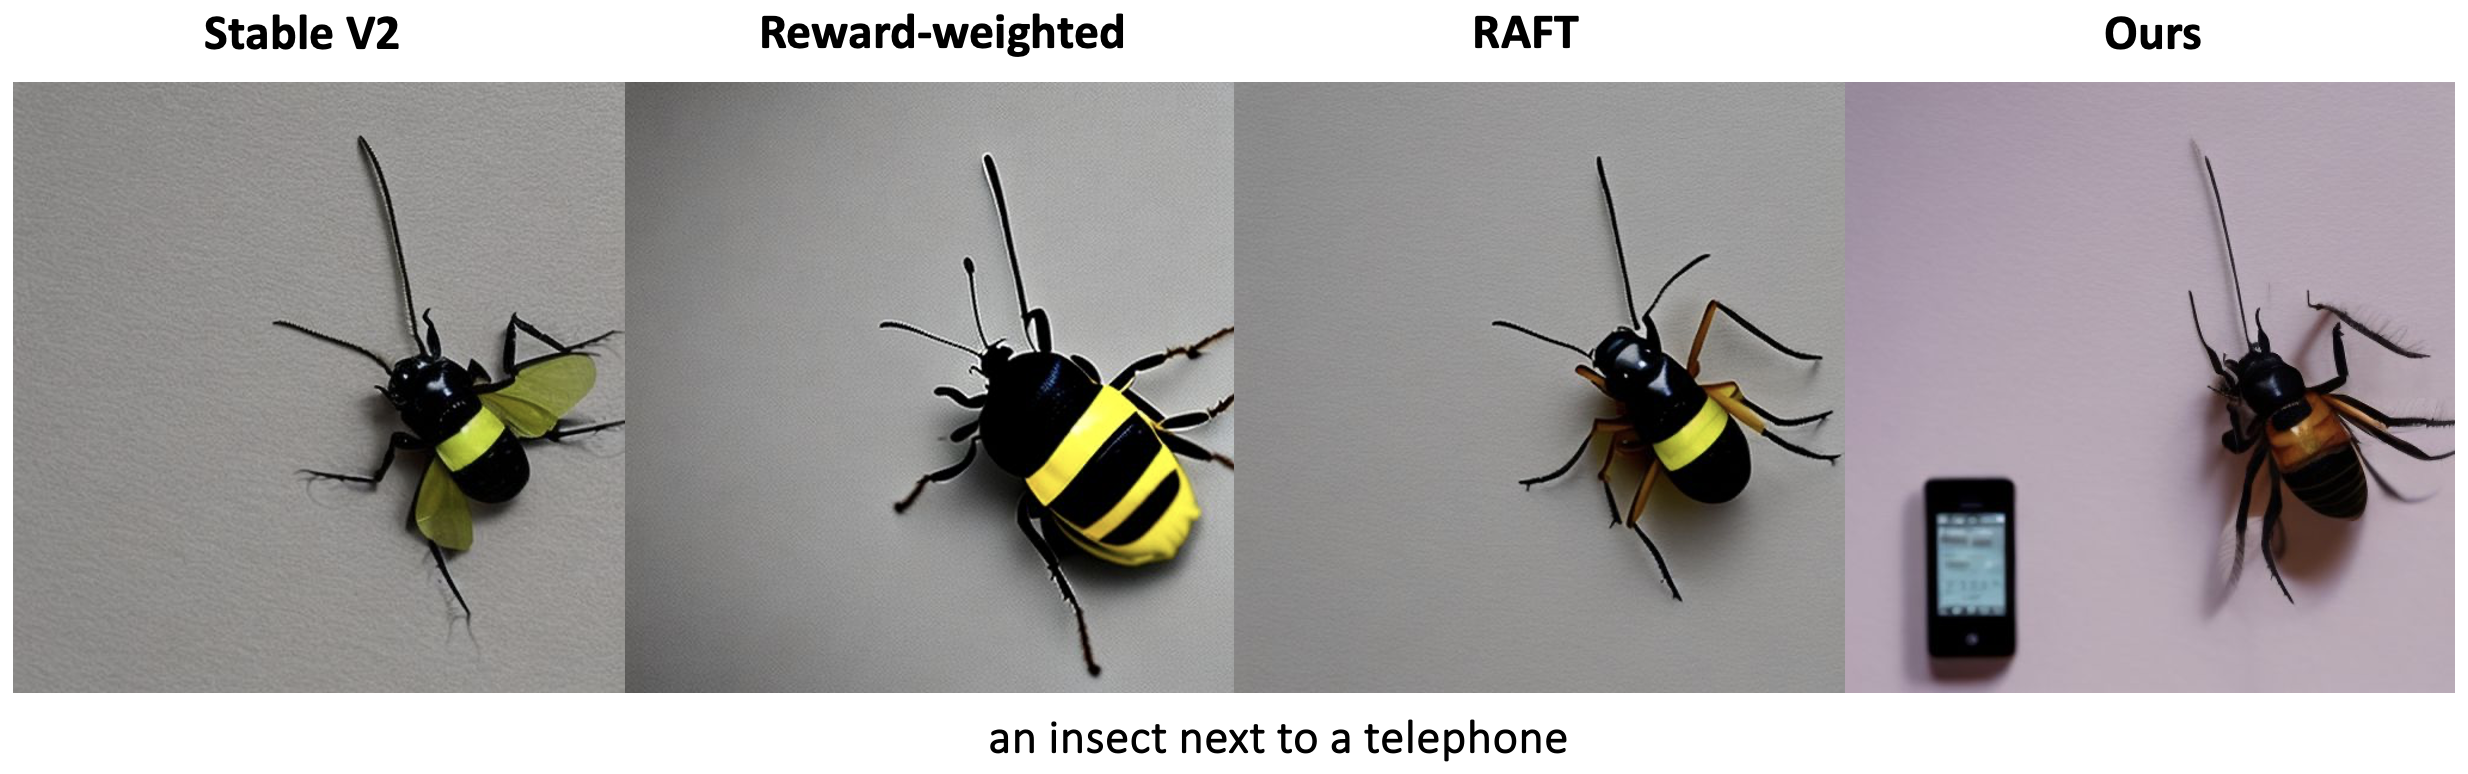 an insect next to a telephone